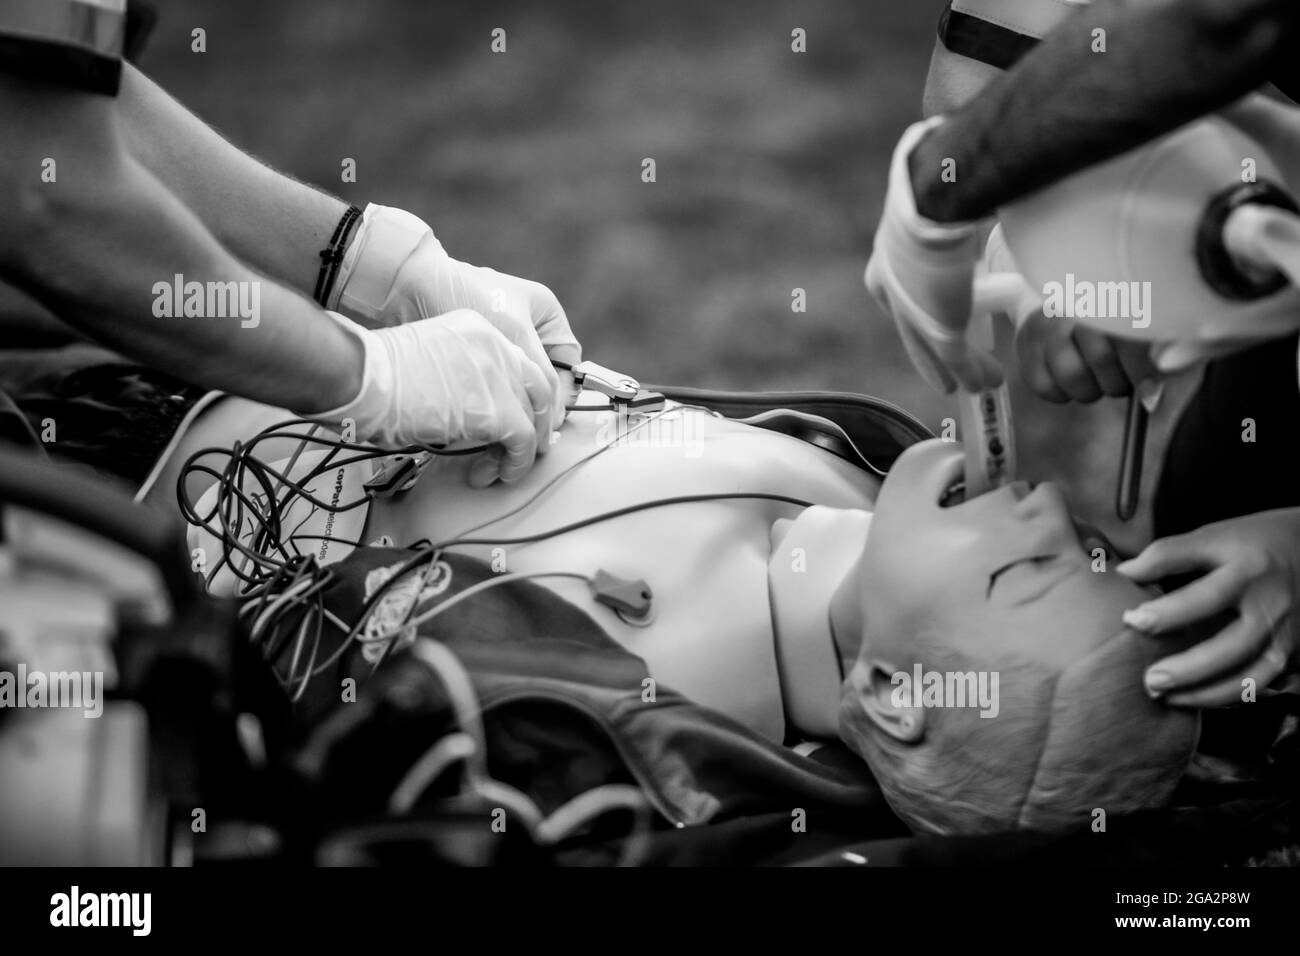 Bucharest, Romania - July 28, 2021: Paramedics perform CPR to a plastic dummy during a public demonstration on how to save a victim. Stock Photo